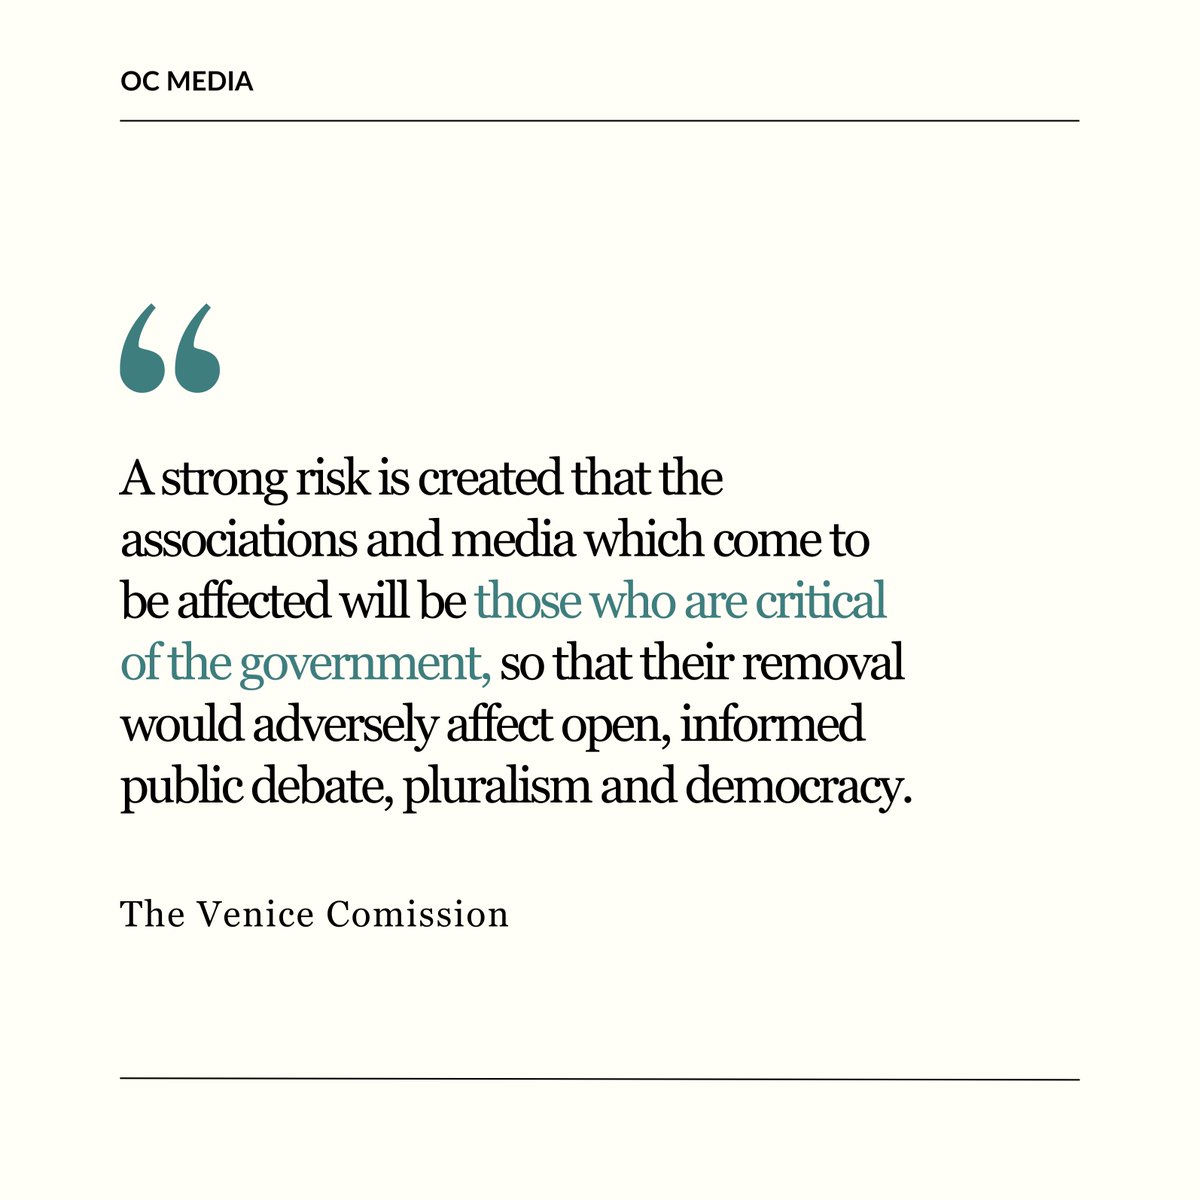 The Venice Comission last night issued a damning report on Georgia’s foreign agent law, slamming it as a violation of the rights to freedom of expression, freedom of association, privacy, and the principle of non-discrimination. ➡️ Live updates: oc-media.org/georgias-forei…